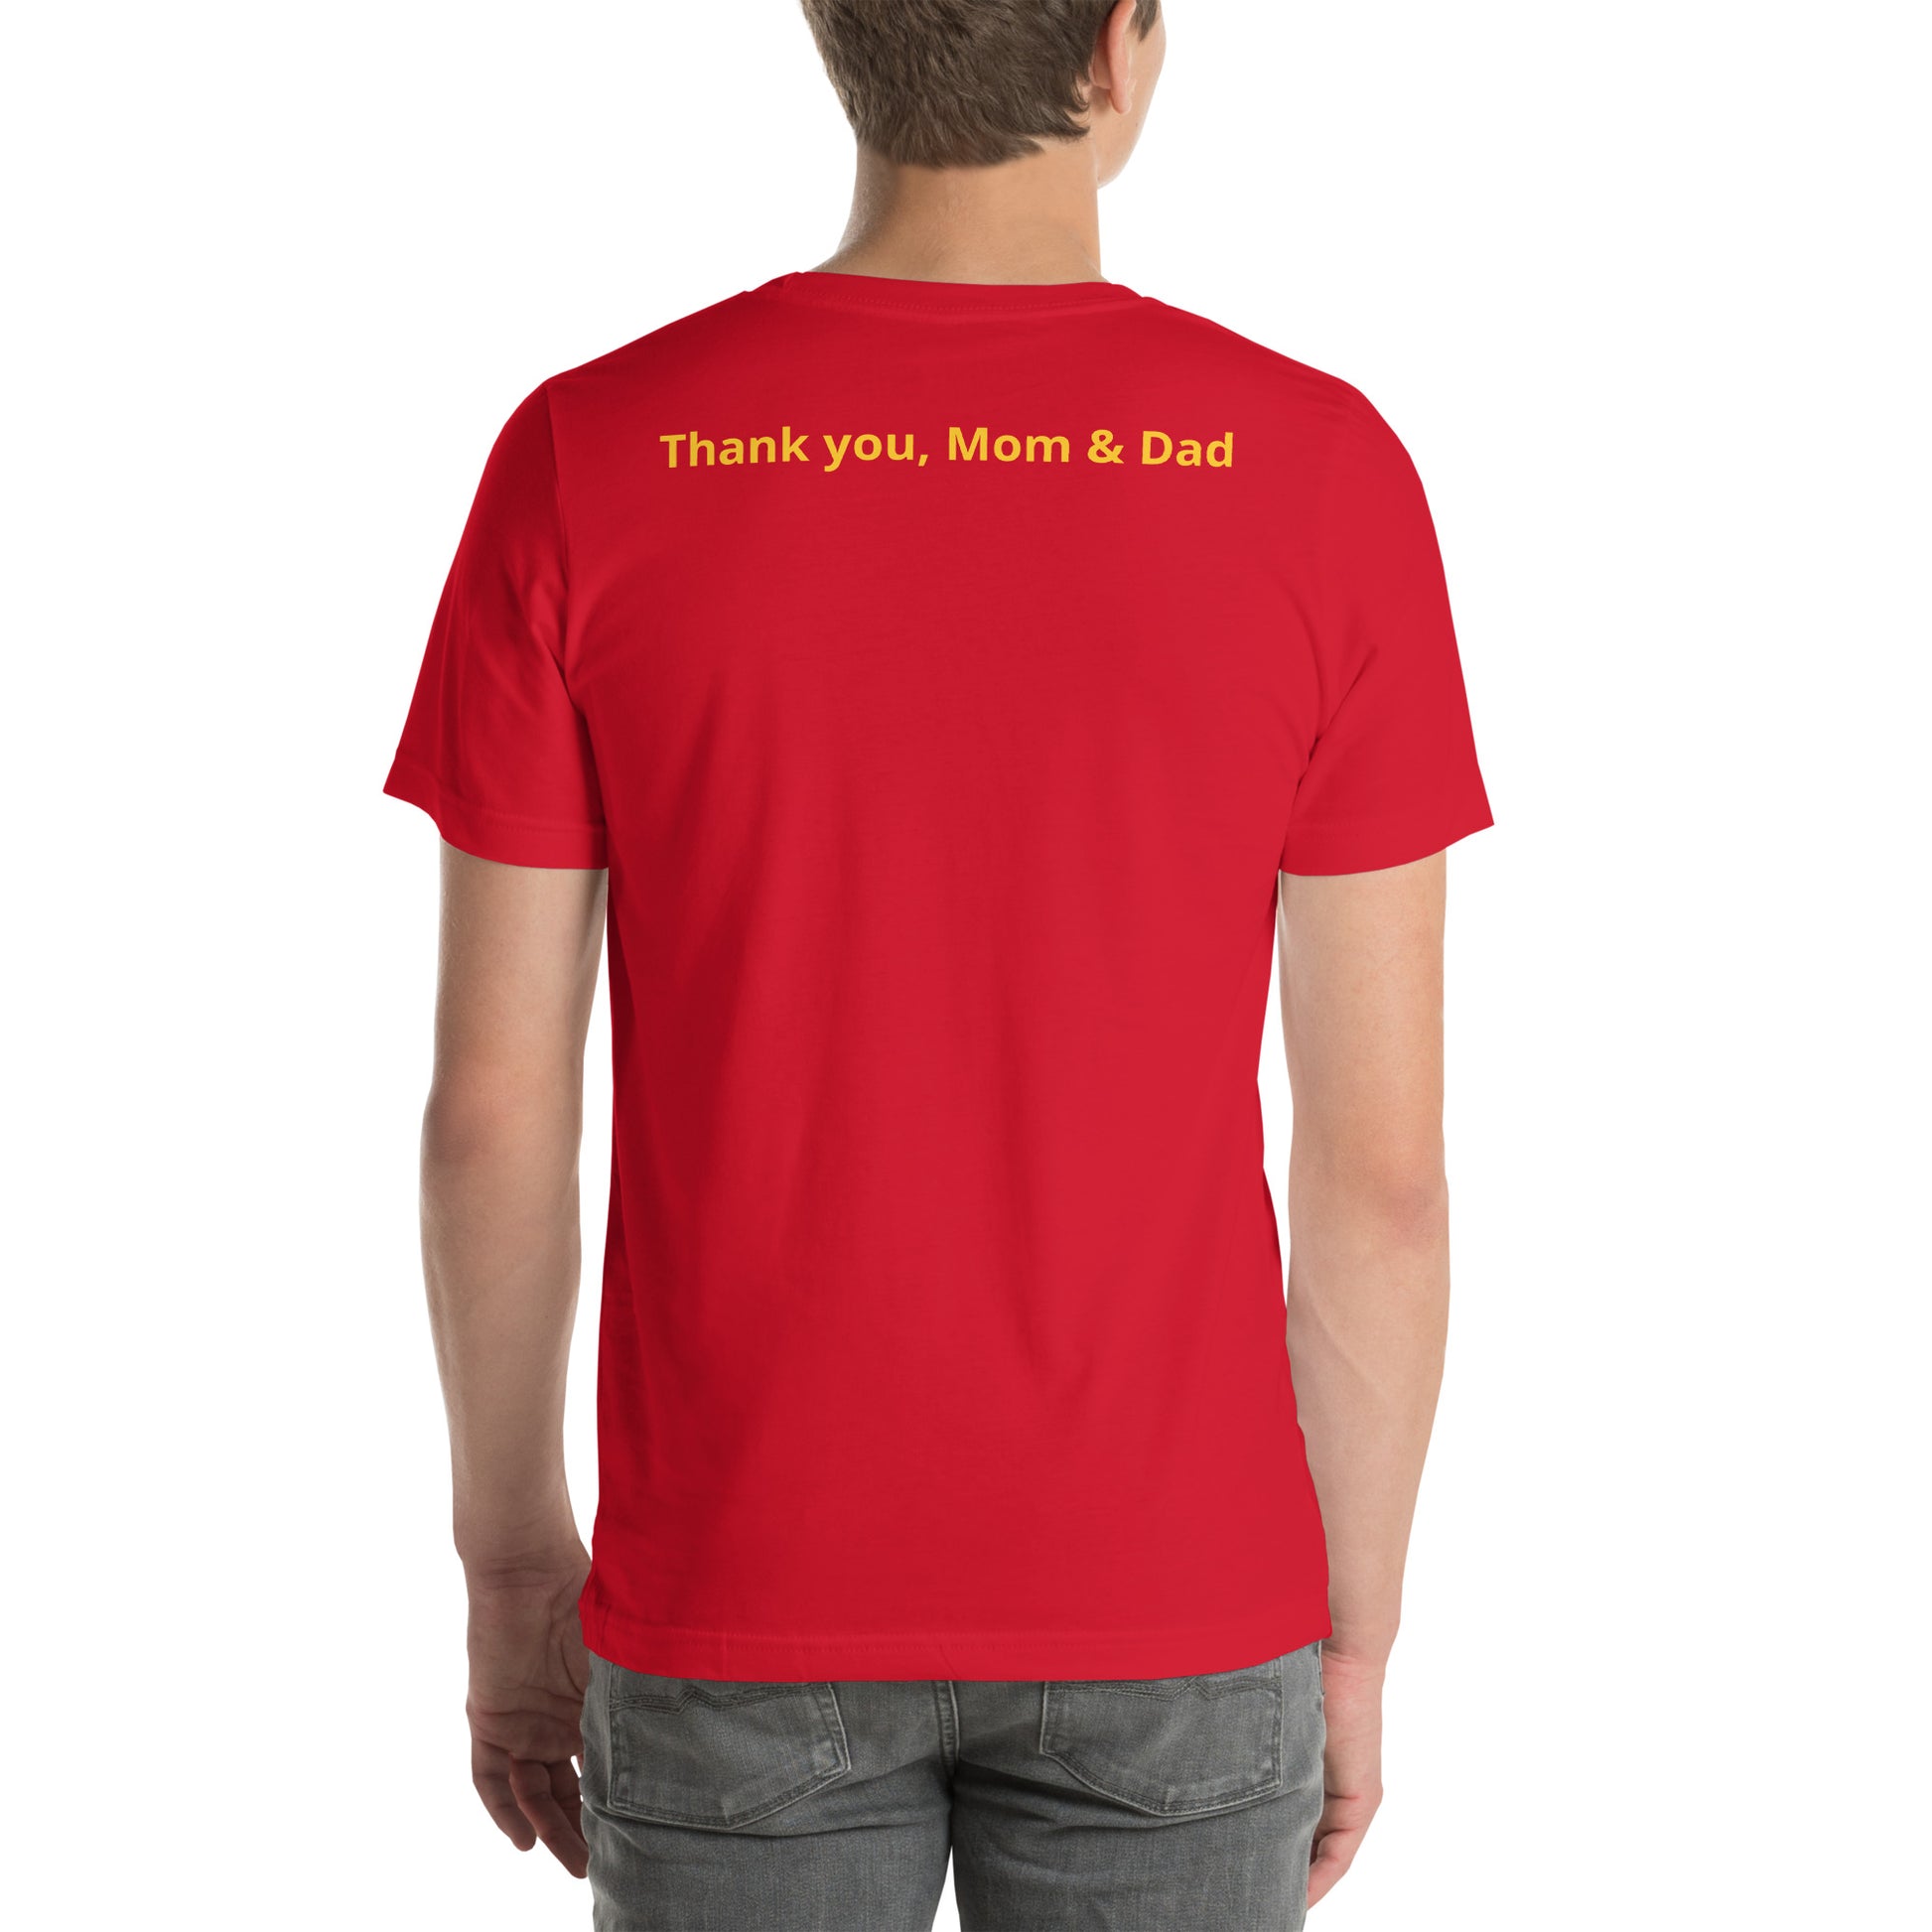 Red color short sleeve unisex tee shirt that says "College '24 Grad" on the front and "Thank you, Mom & Dad" on the back in yellow-gold font